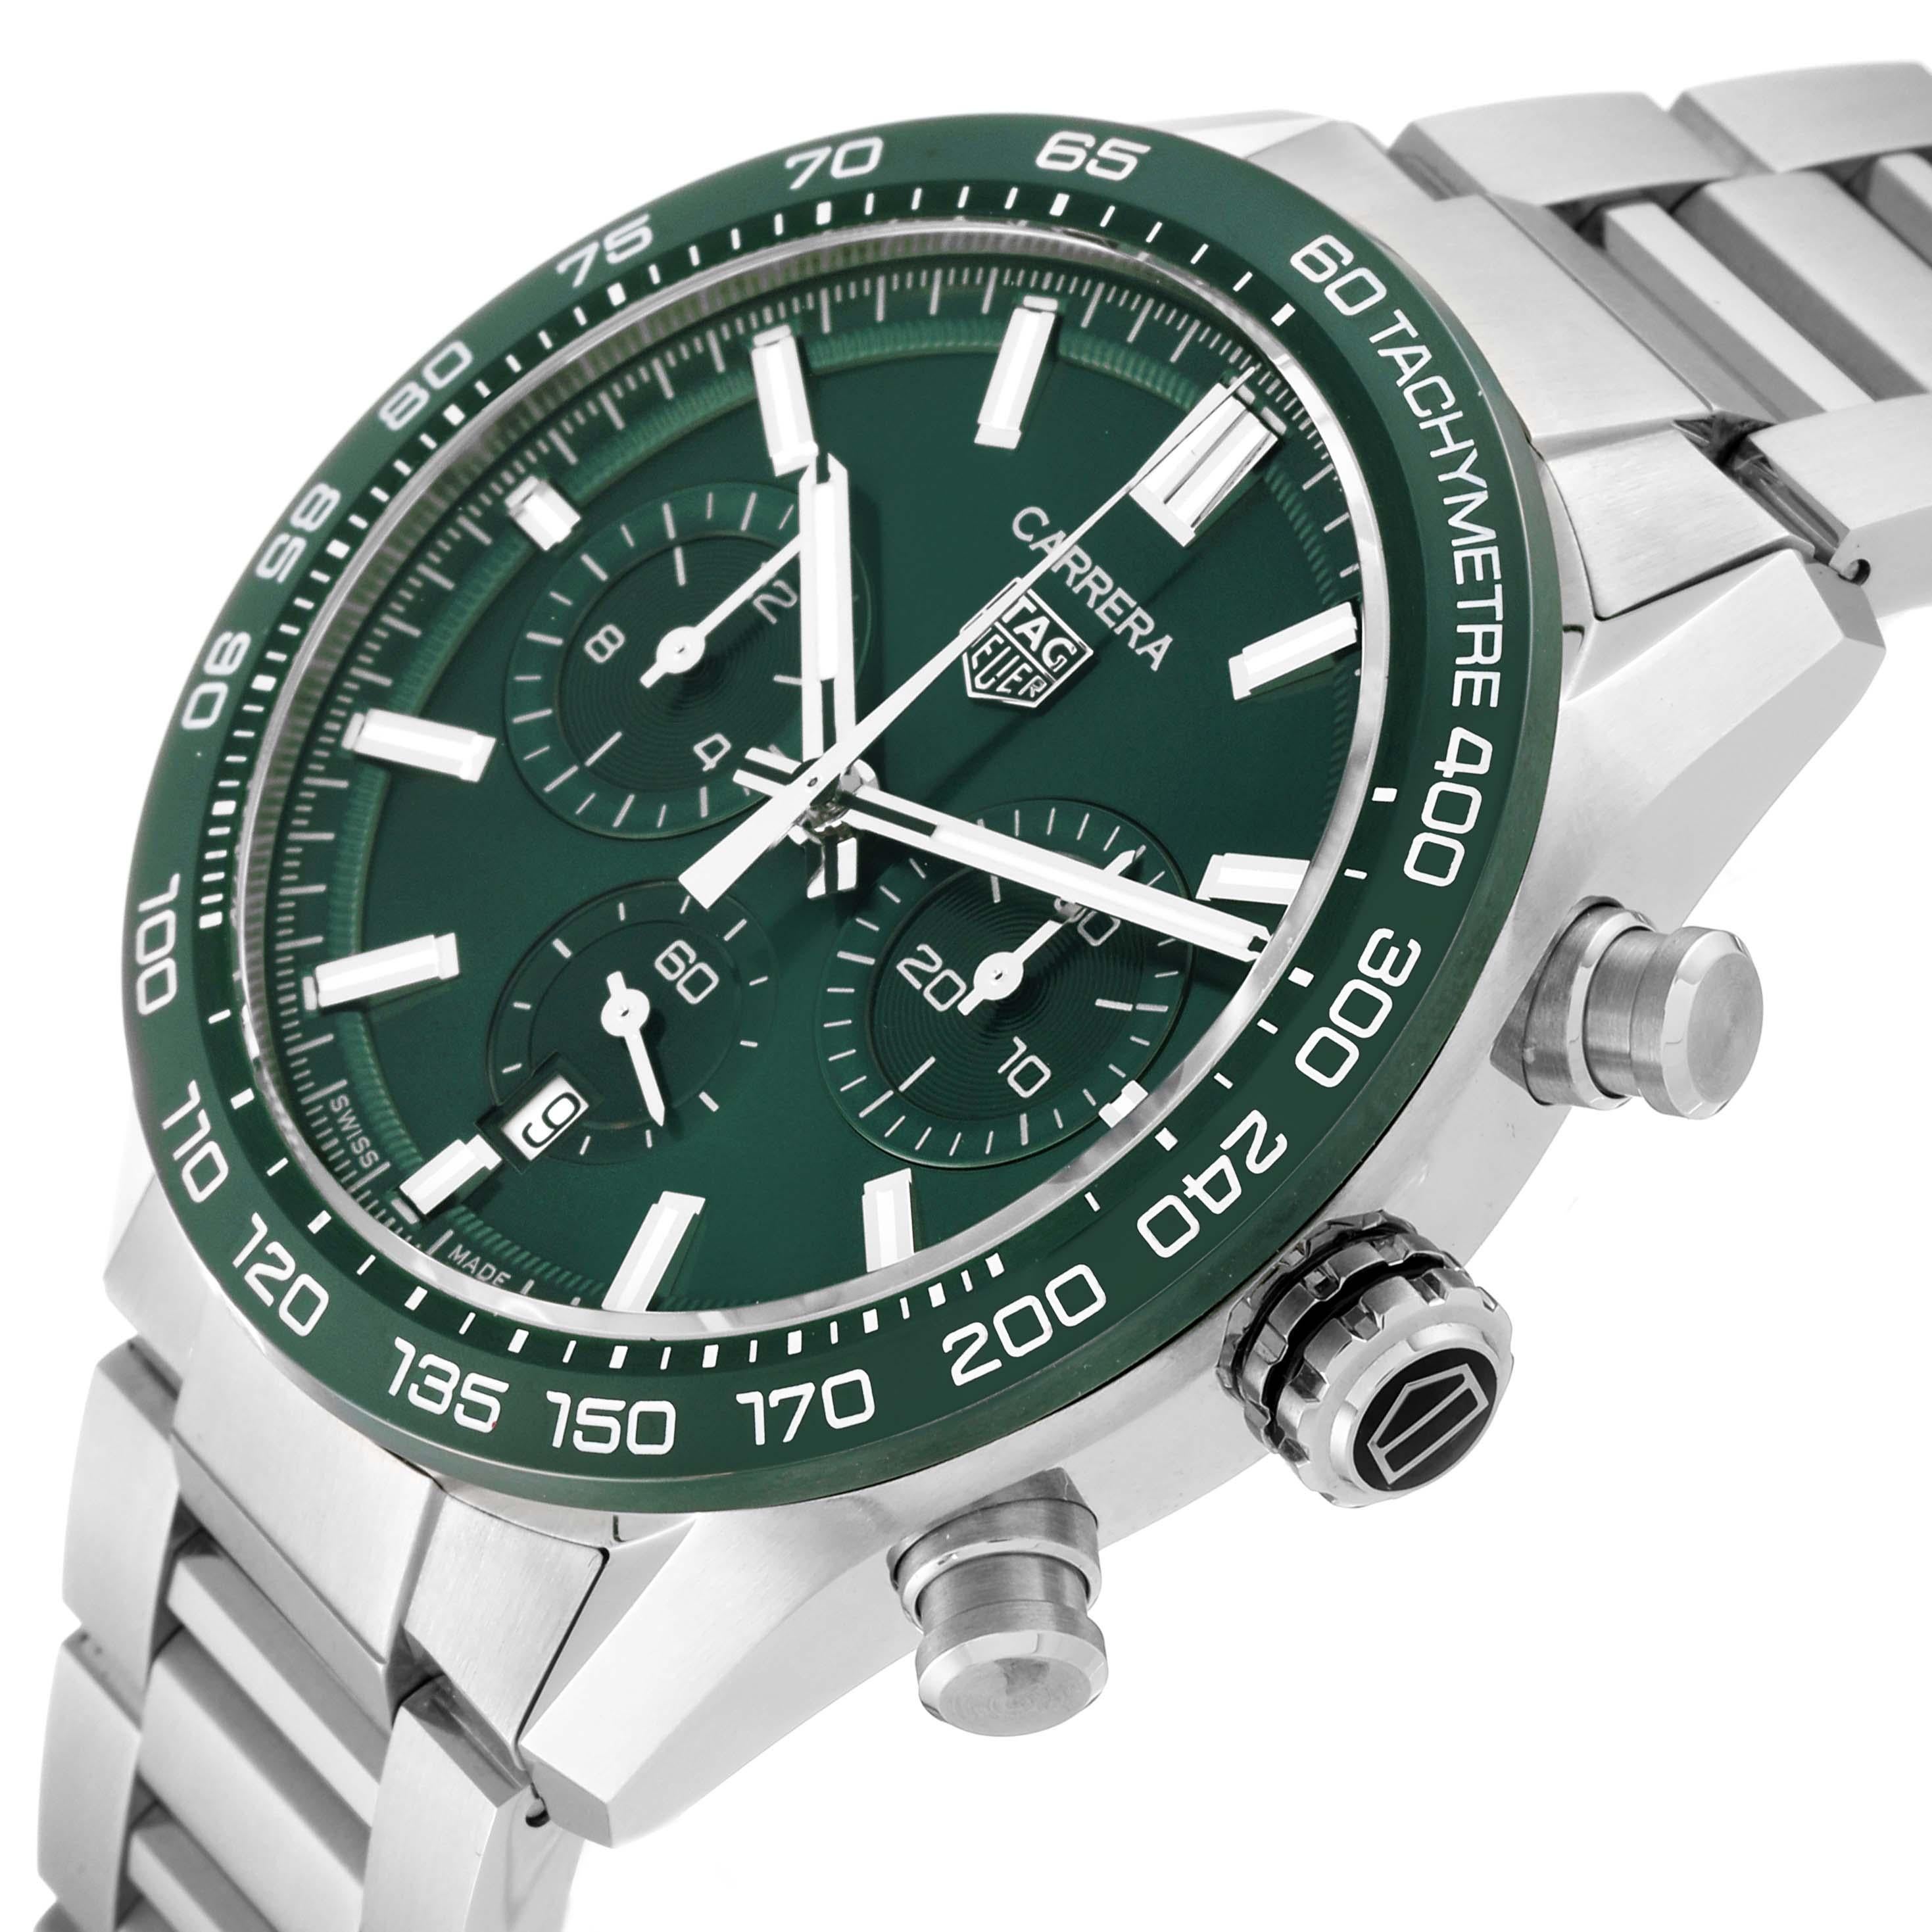 Tag Heuer Carrera Chronograph Green Dial Steel Mens Watch CBN2A1N Unworn. Automatic self-winding chronograph movement. Stainless steel round case 44.0 mm. Transparent exhibition sapphire crystal caseback. Green ceramic tachymeter scale bezel.